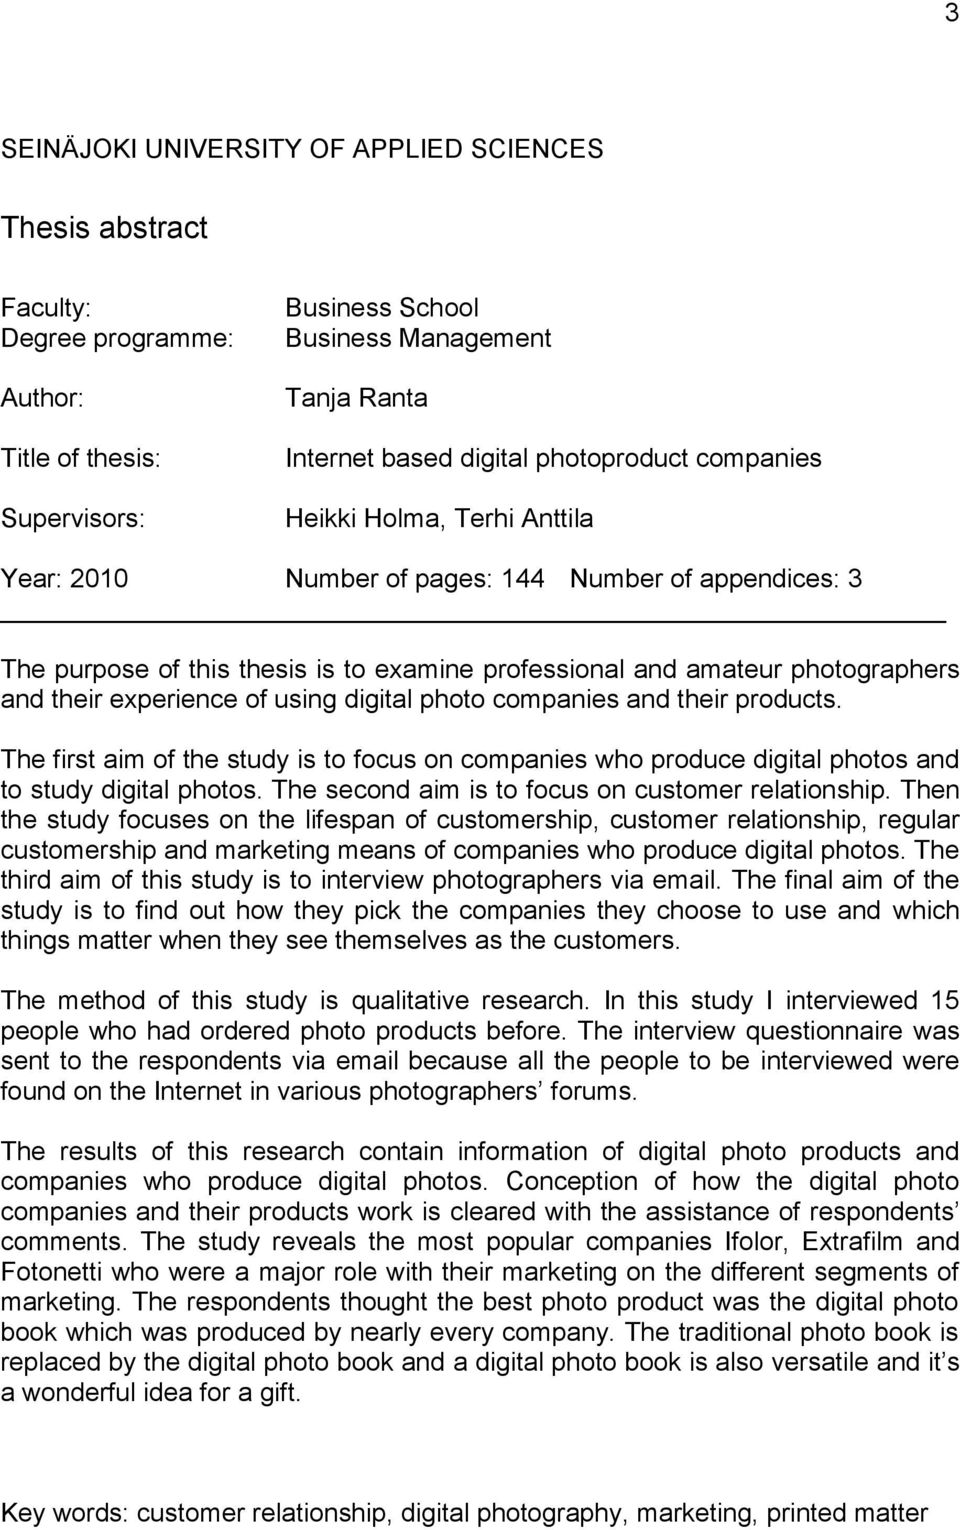 experience of using digital photo companies and their products. The first aim of the study is to focus on companies who produce digital photos and to study digital photos.